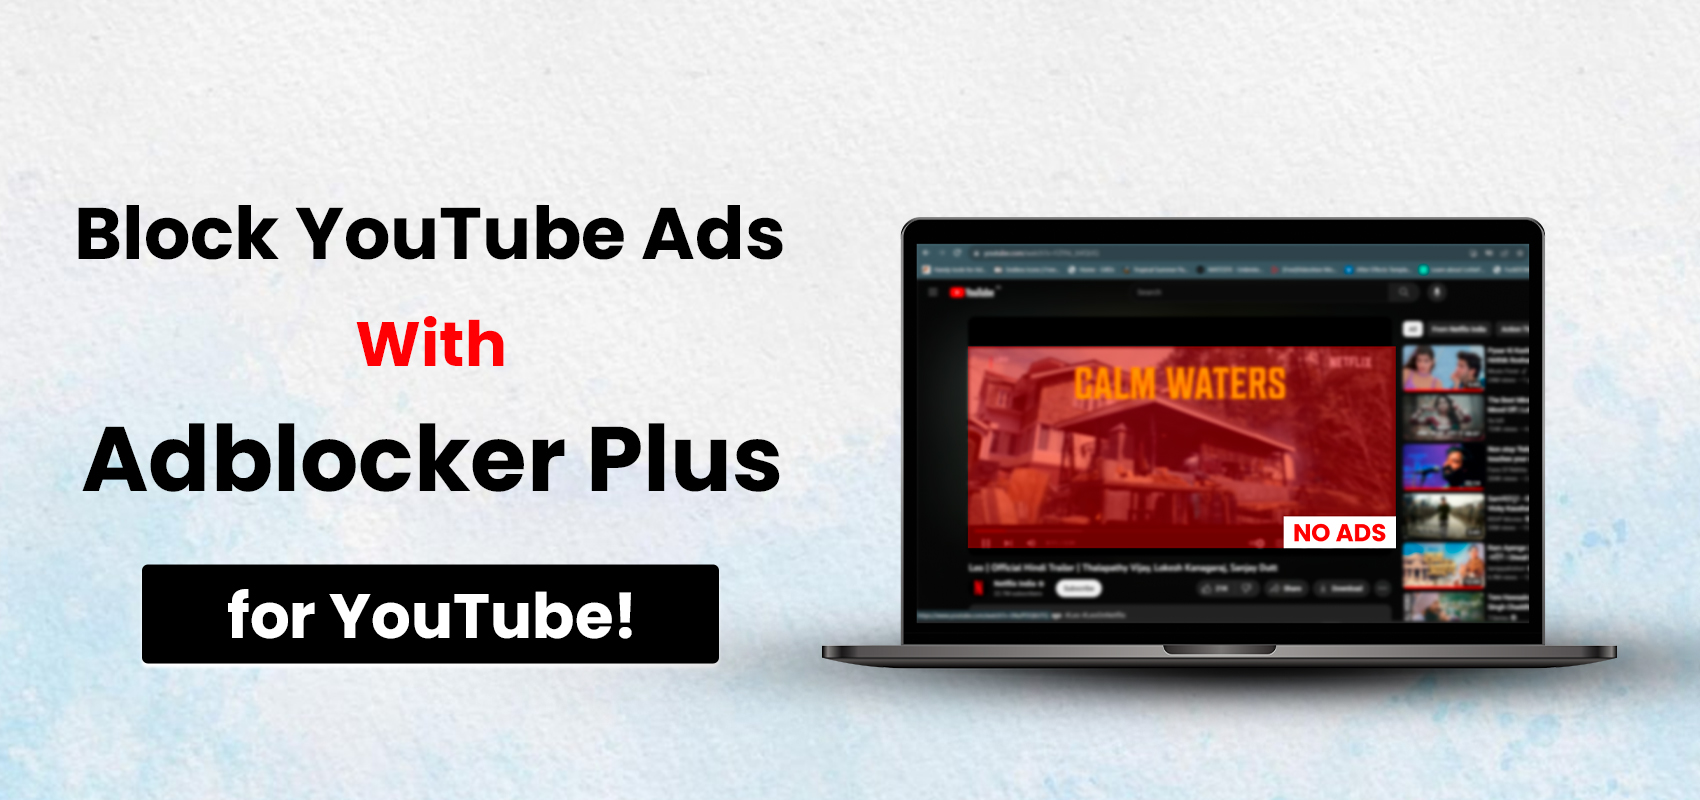 Block YouTube Ads with Adblocker Plus for YouTube